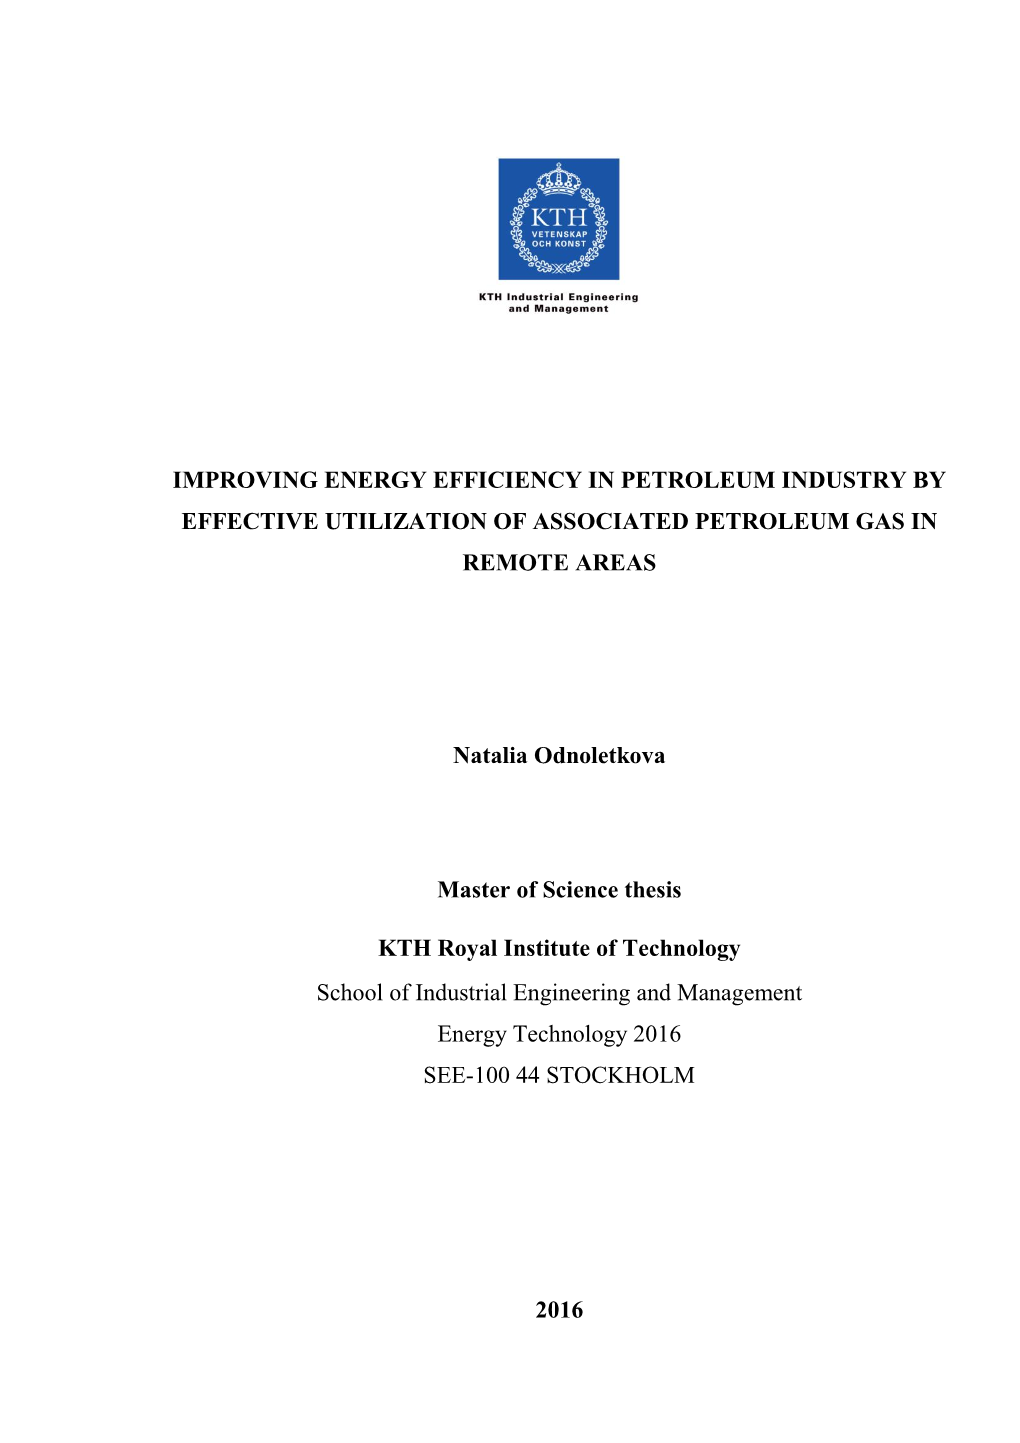 Improving Energy Efficiency in Petroleum Industry by Effective Utilization of Associated Petroleum Gas in Remote Areas